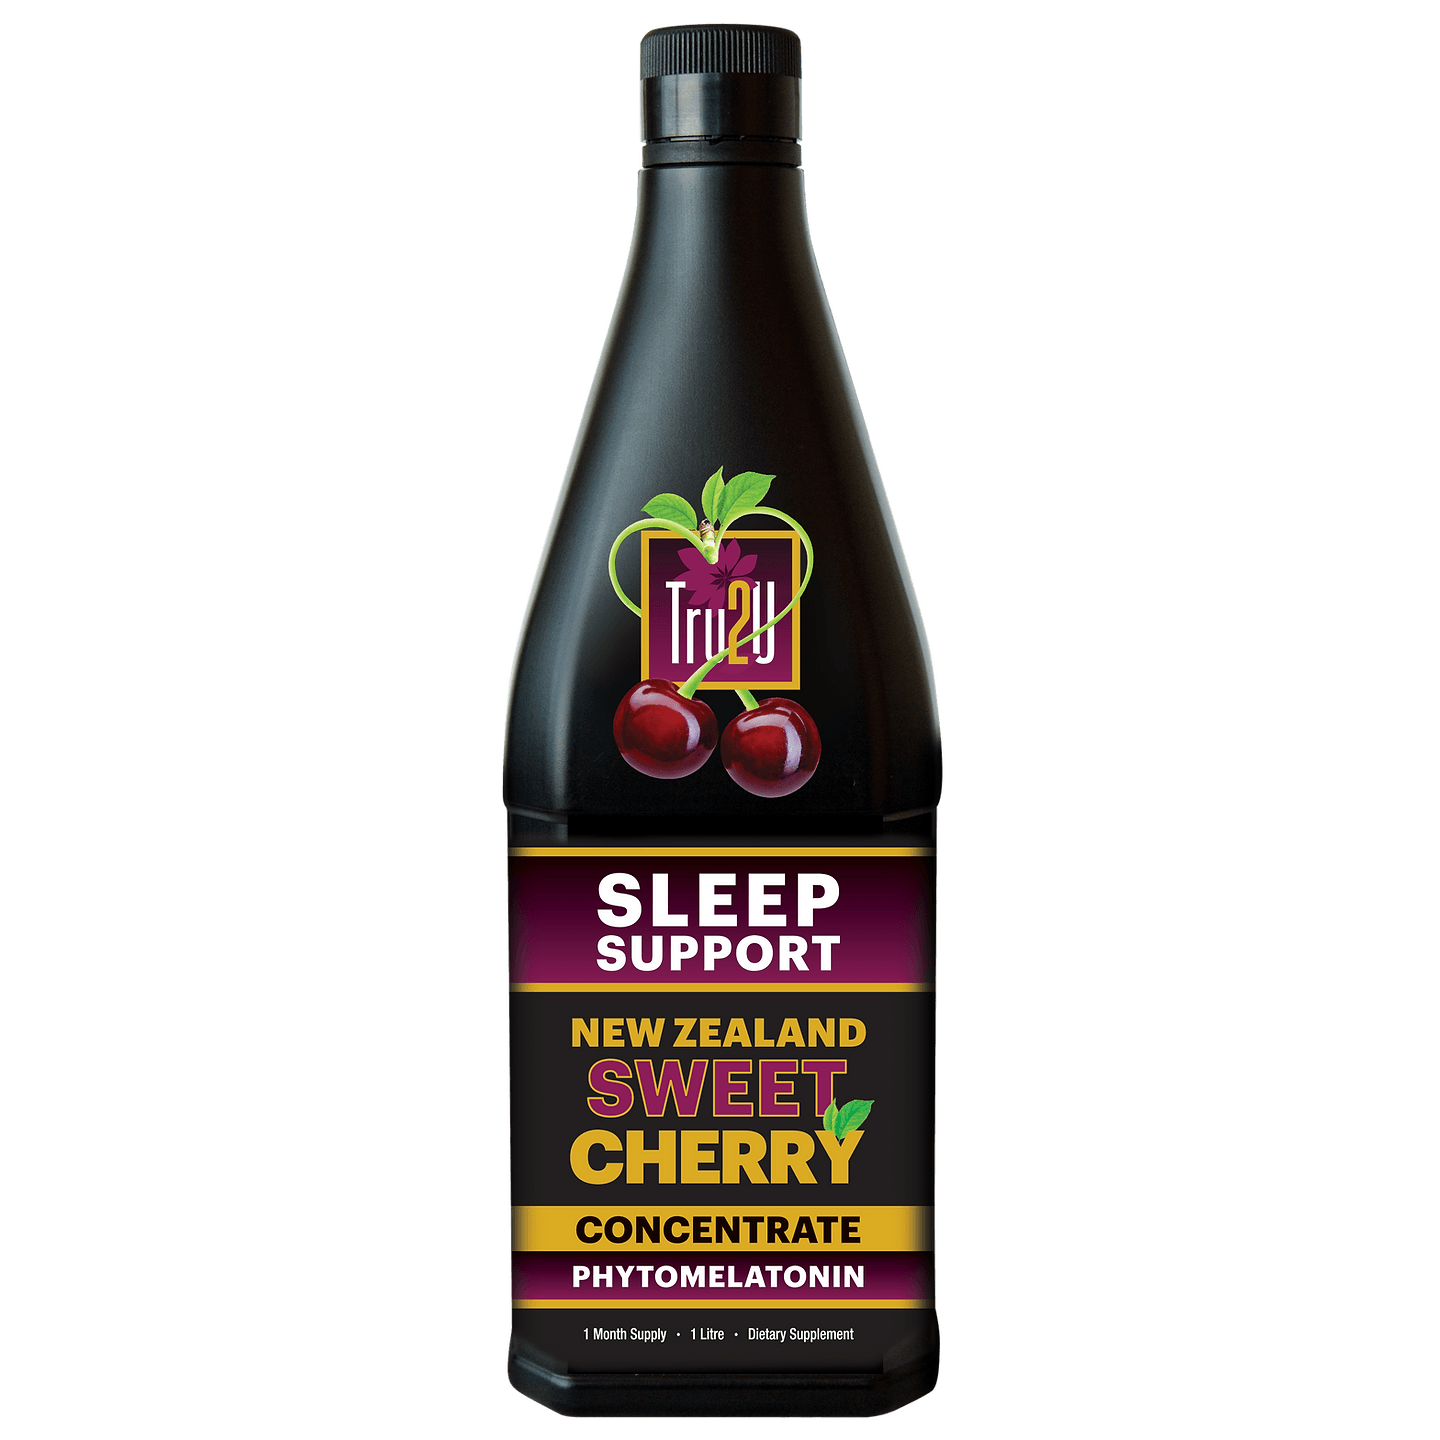 Sleep Support Sweet Cherry Concentrate